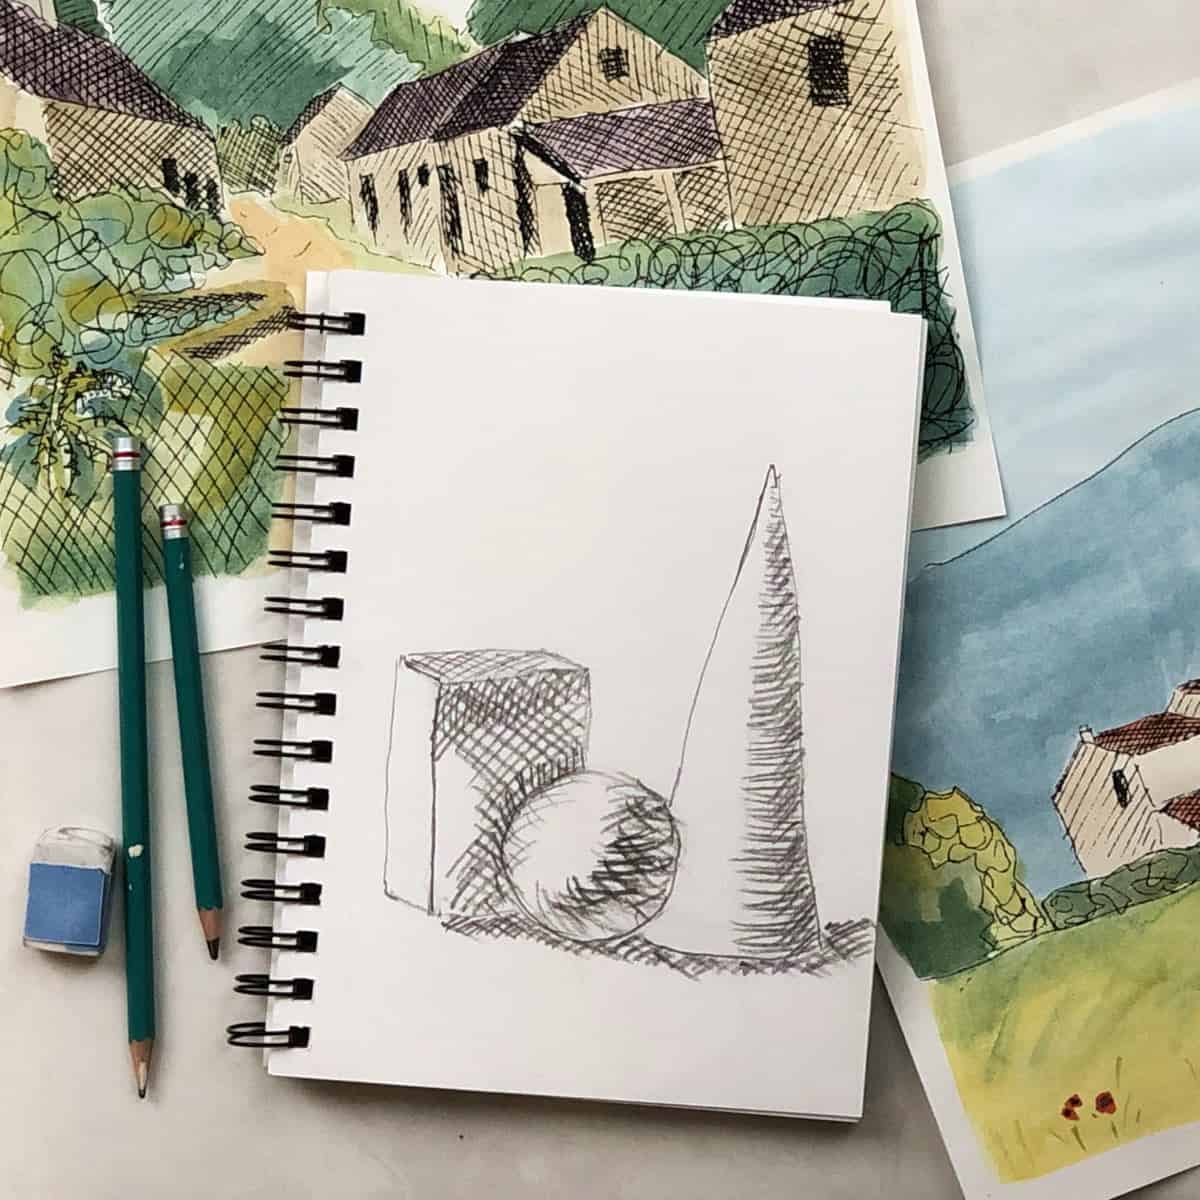 Crosshatching drawing of a cone, sphere, and box on a spiral notebook with colorful crosshatched watercolor paintings behind with drawing pencils and an eraser.